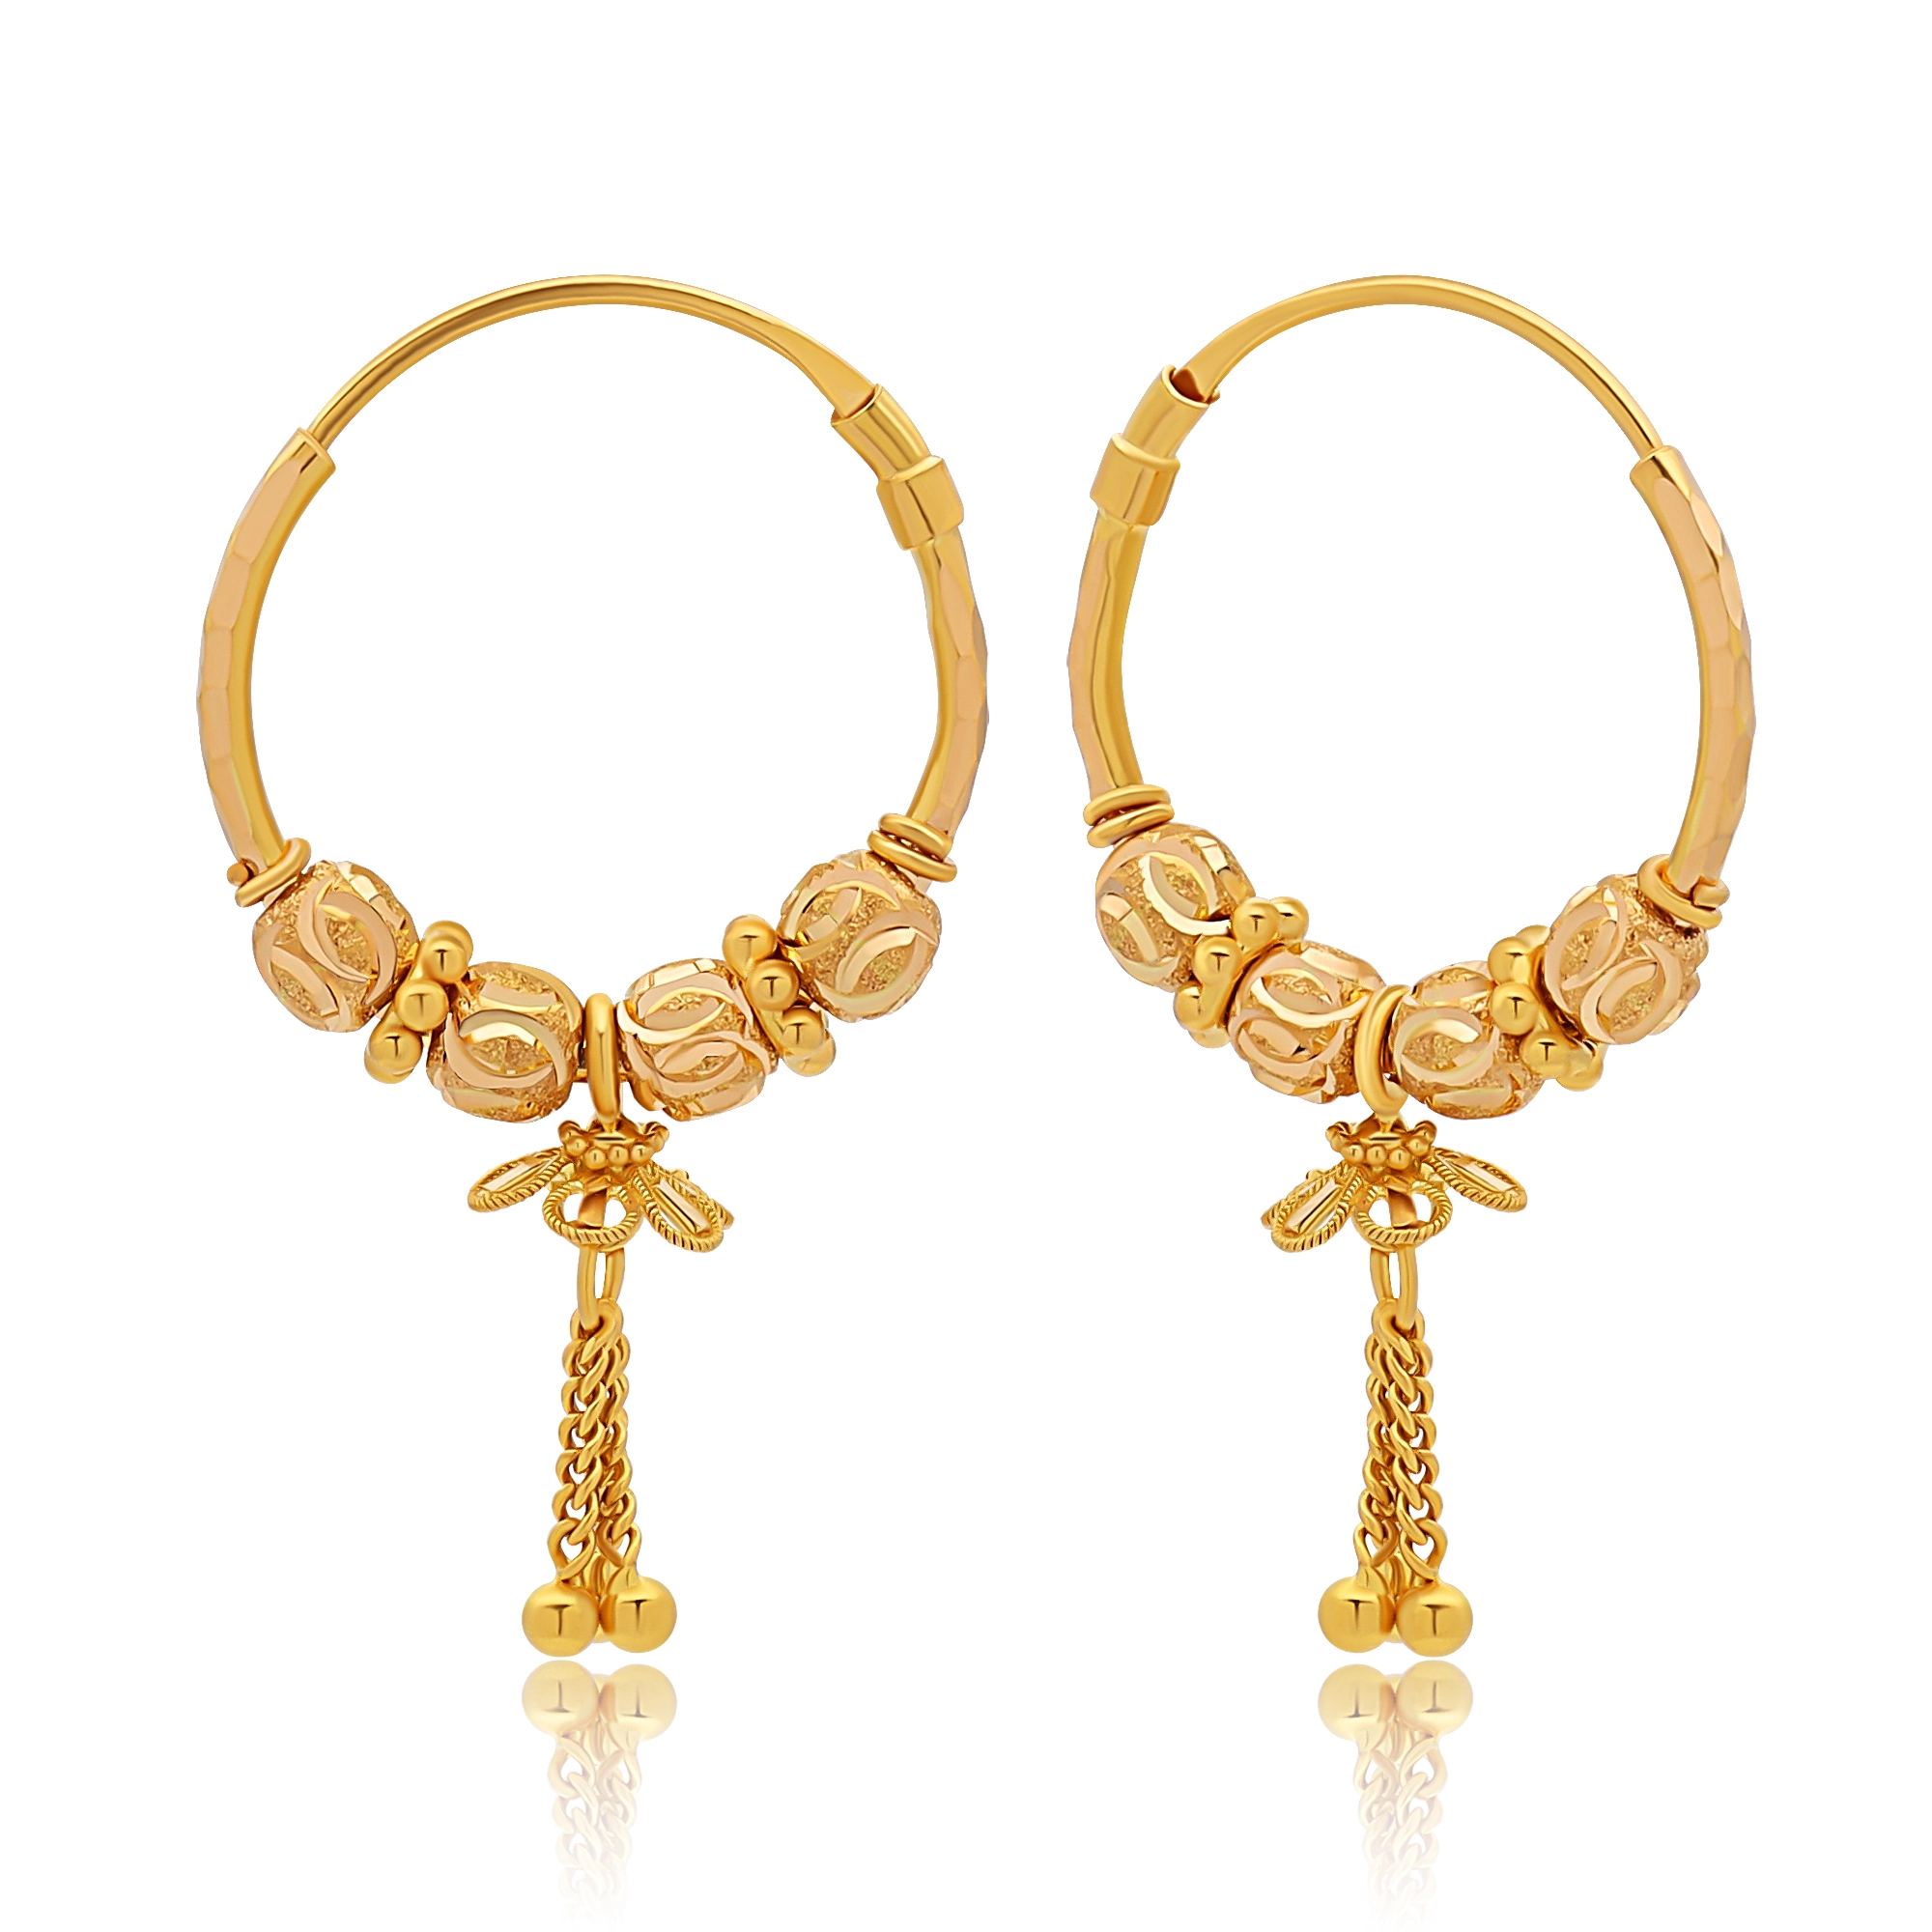 22K Gold Bead Charms Hoop Earrings (5.80G) - Queen of Hearts Jewelry